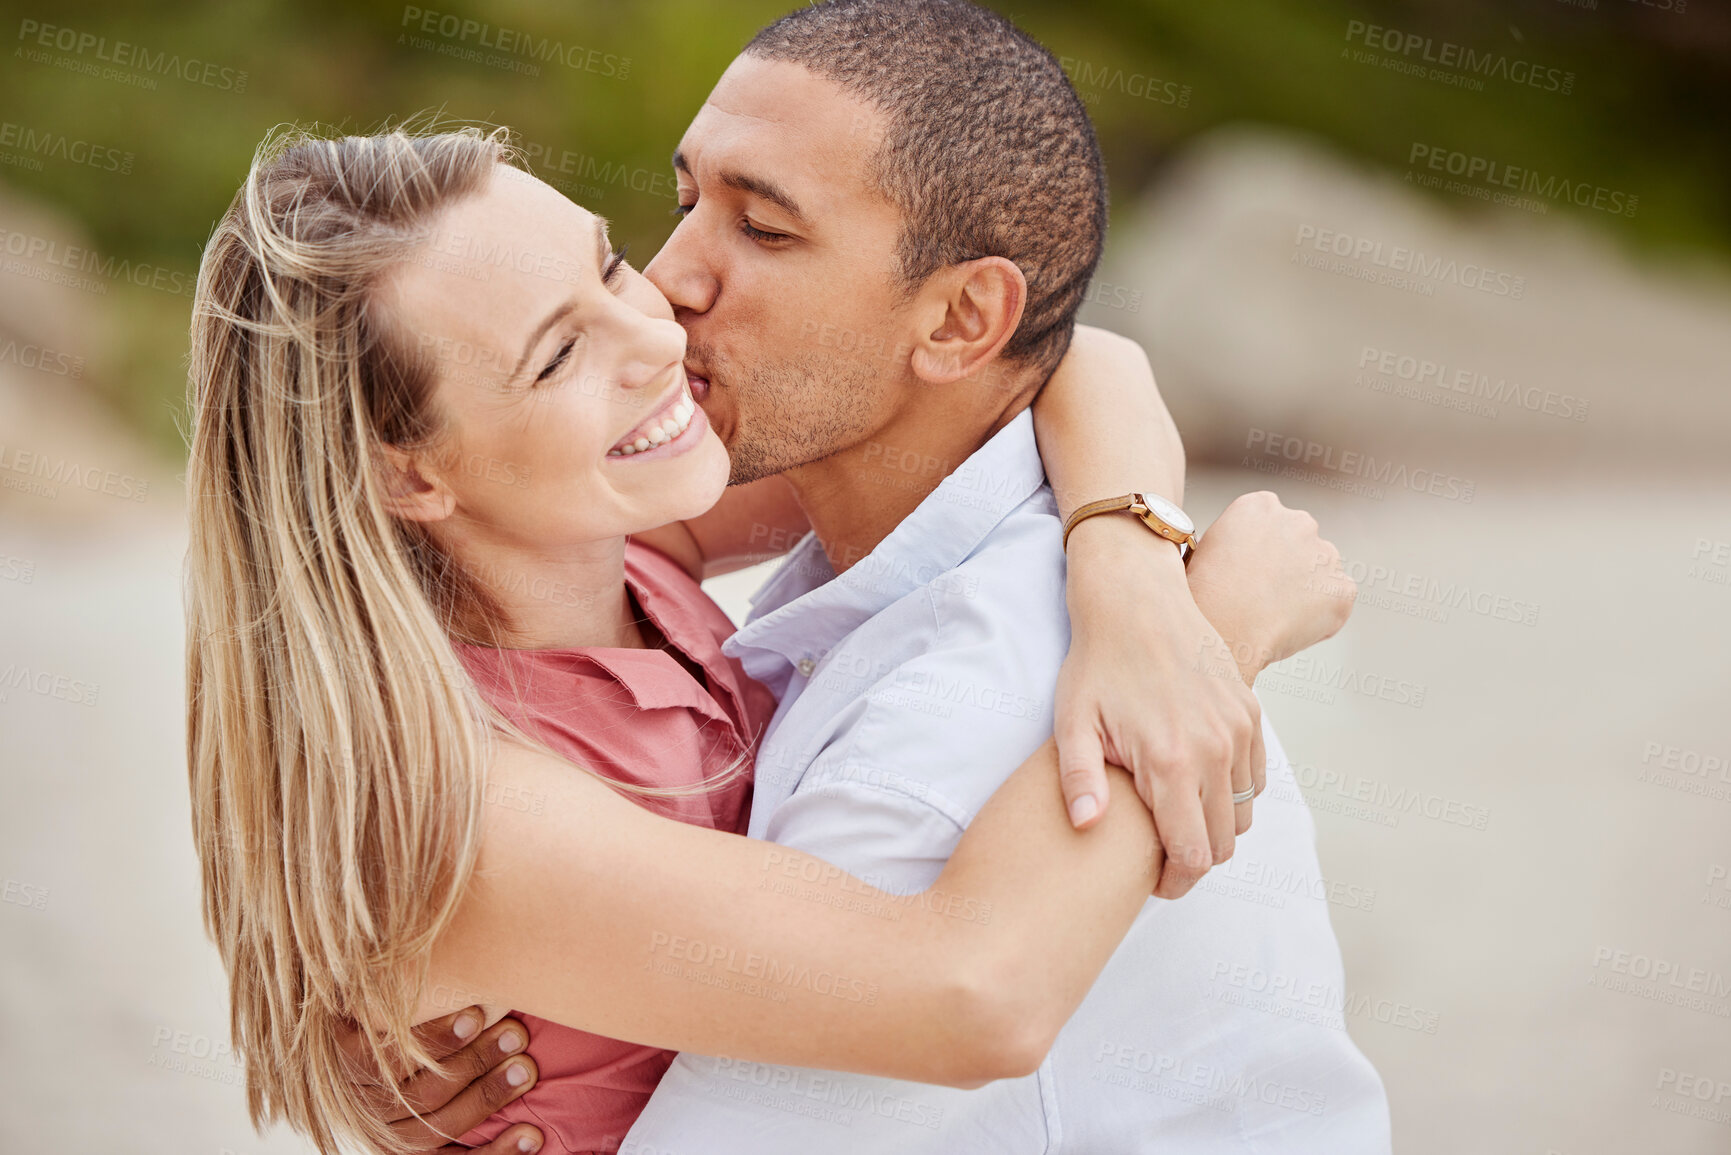 Buy stock photo Smile, love and happy couple kiss on the cheek on honeymoon vacation outdoors to celebrate their marriage. Happiness, interracial and smiling woman enjoys traveling on romantic trip with her partner